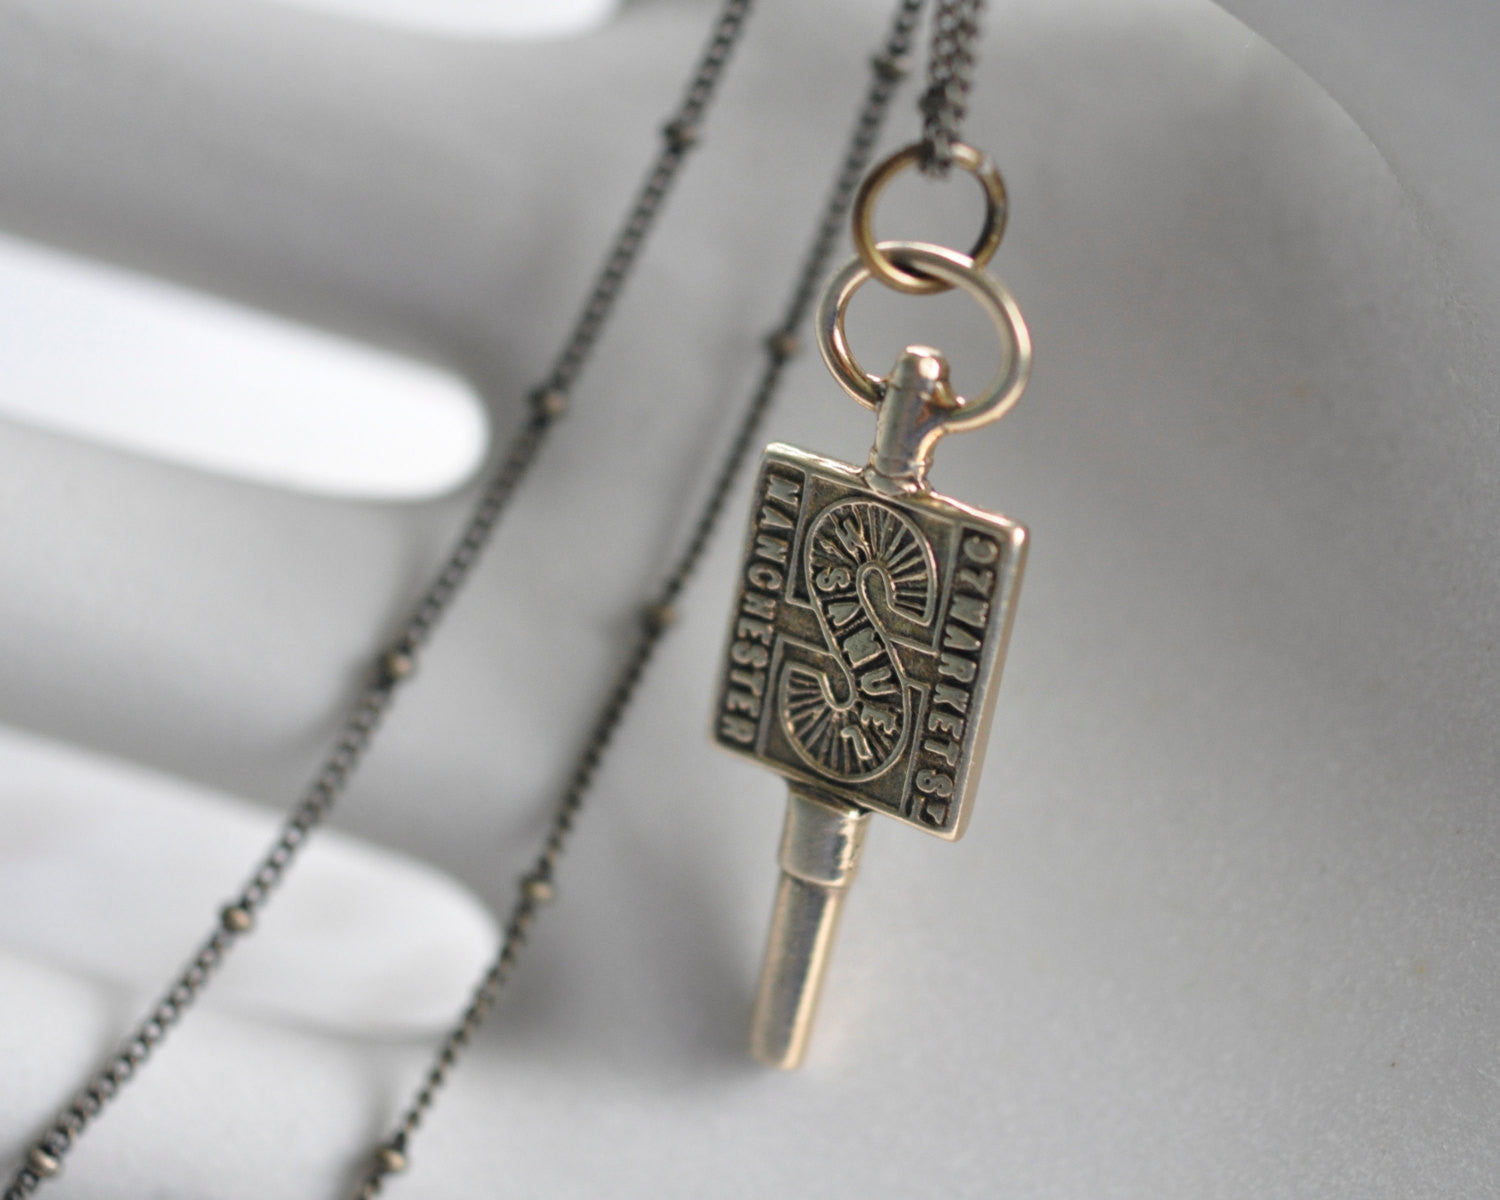 Engraved Sterling Silver Locket and Key Necklace